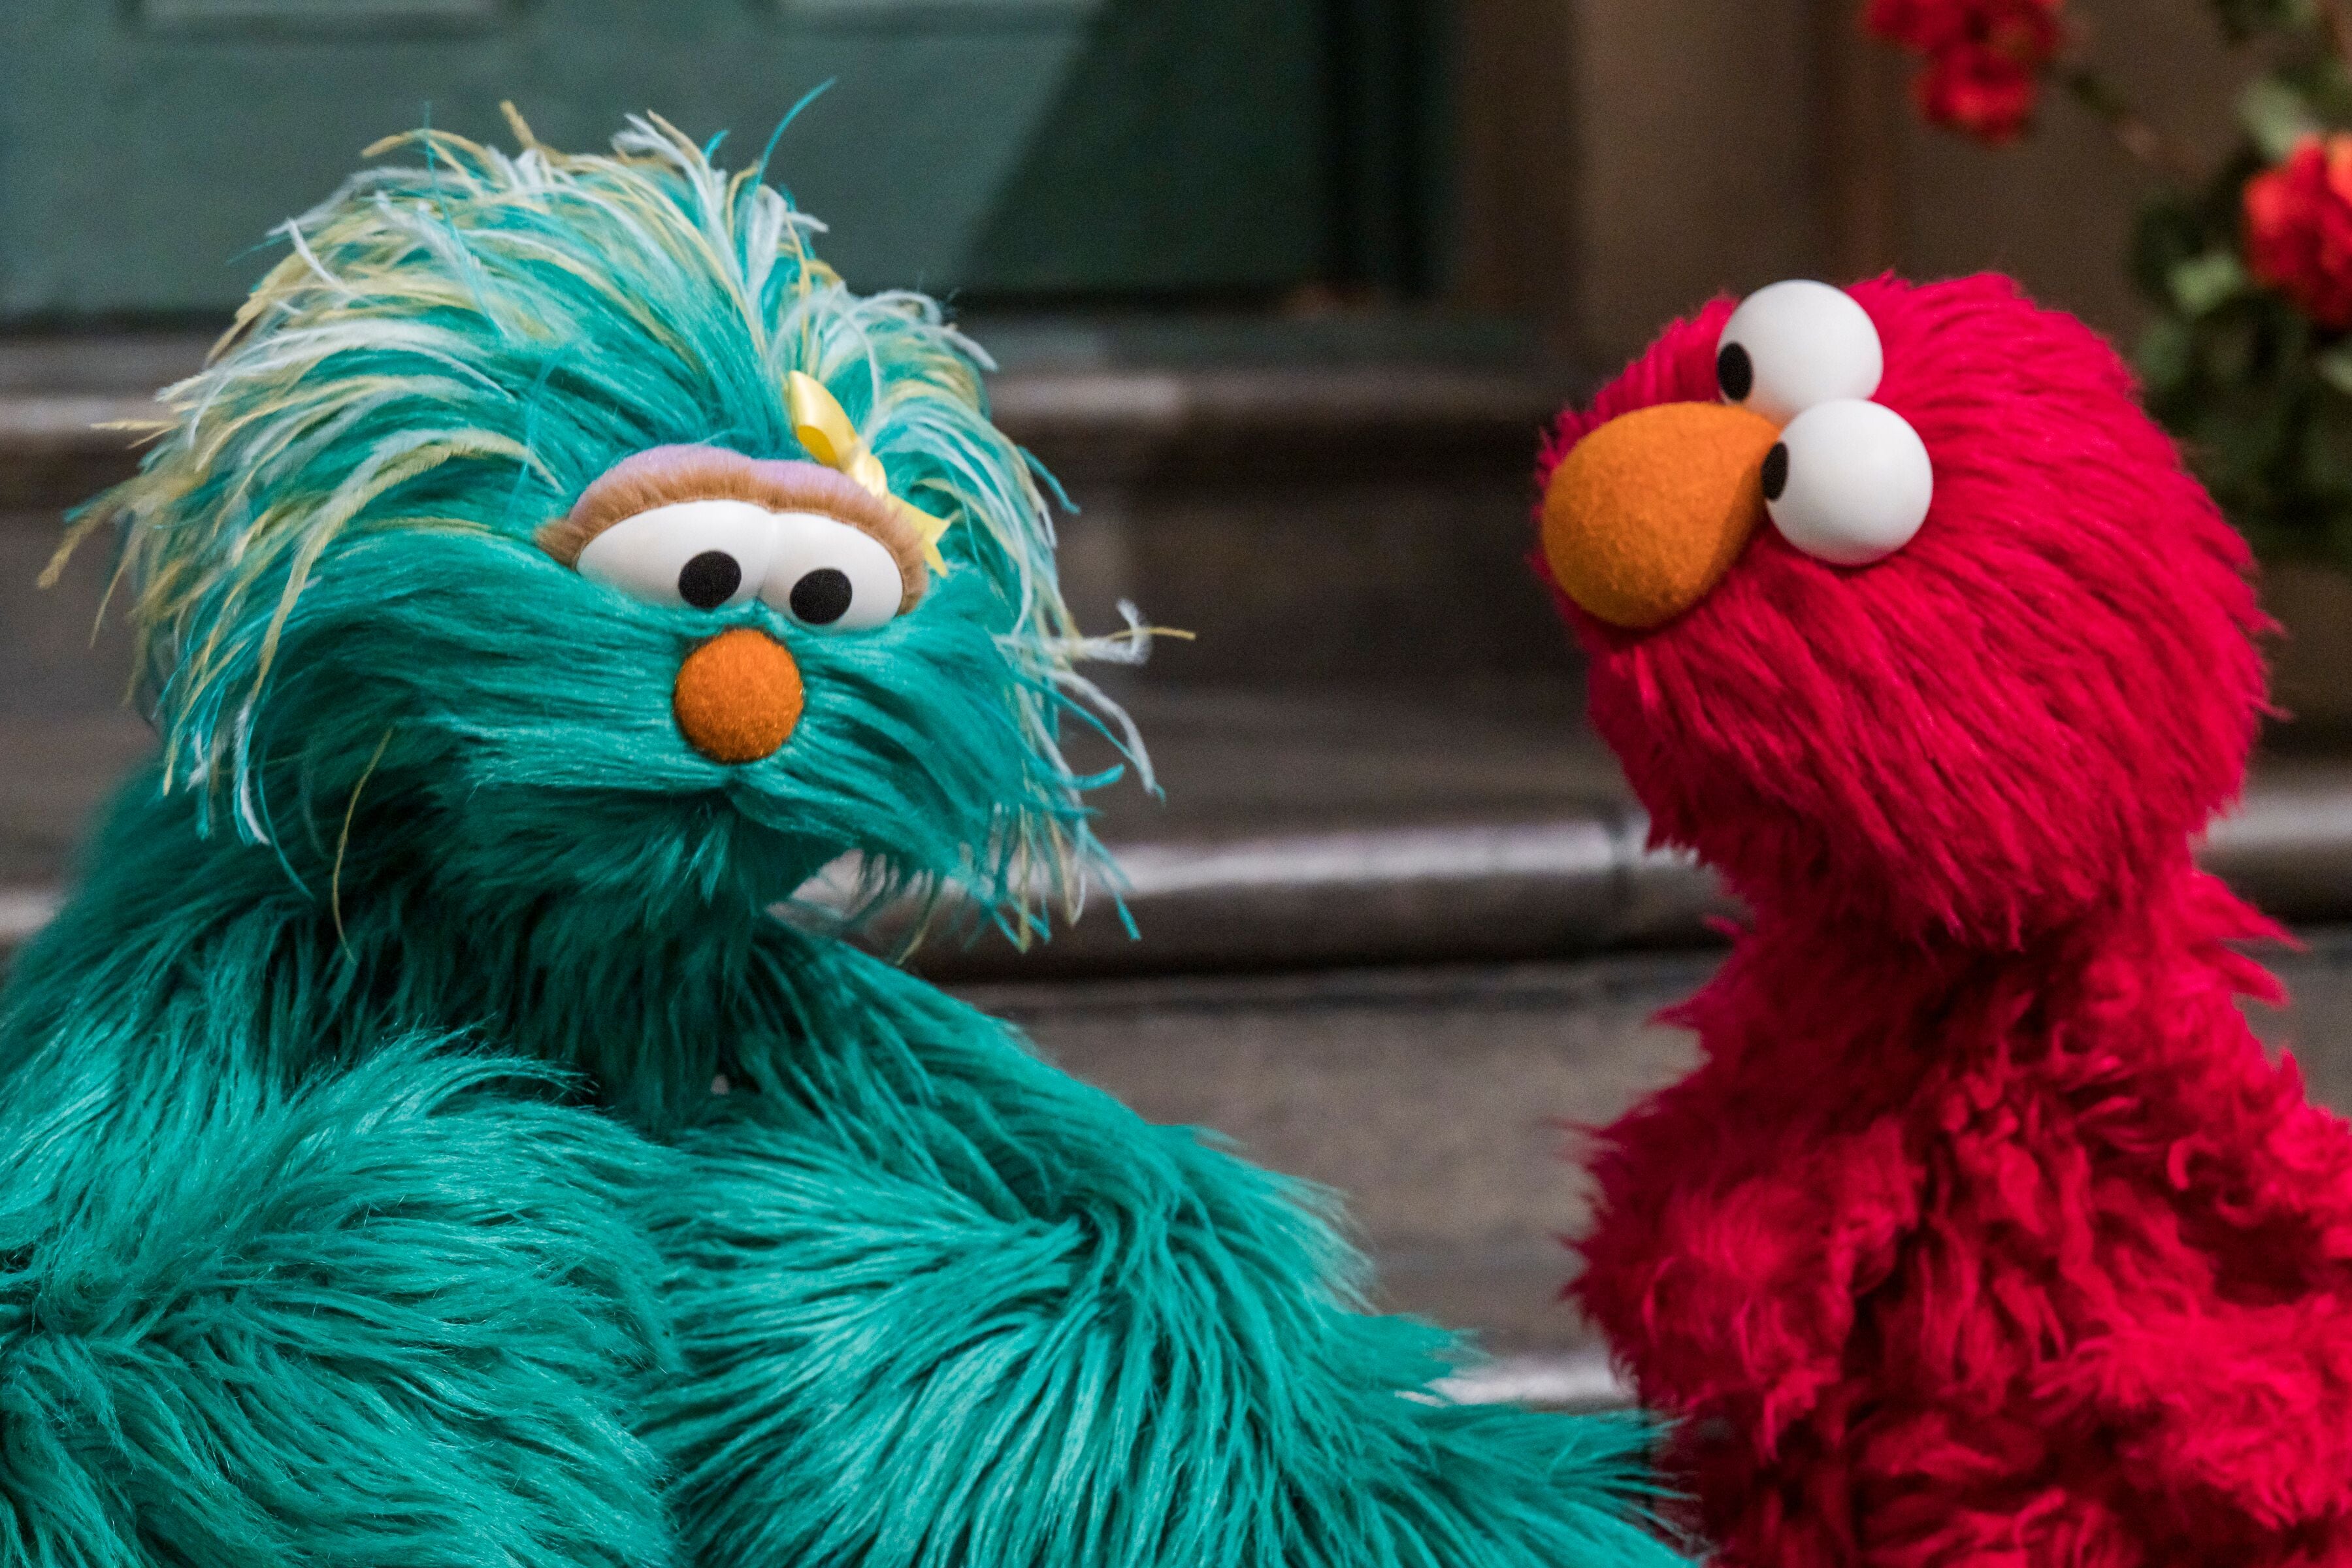 Whether the day sunny or stormy, Elmo there for of the wounded